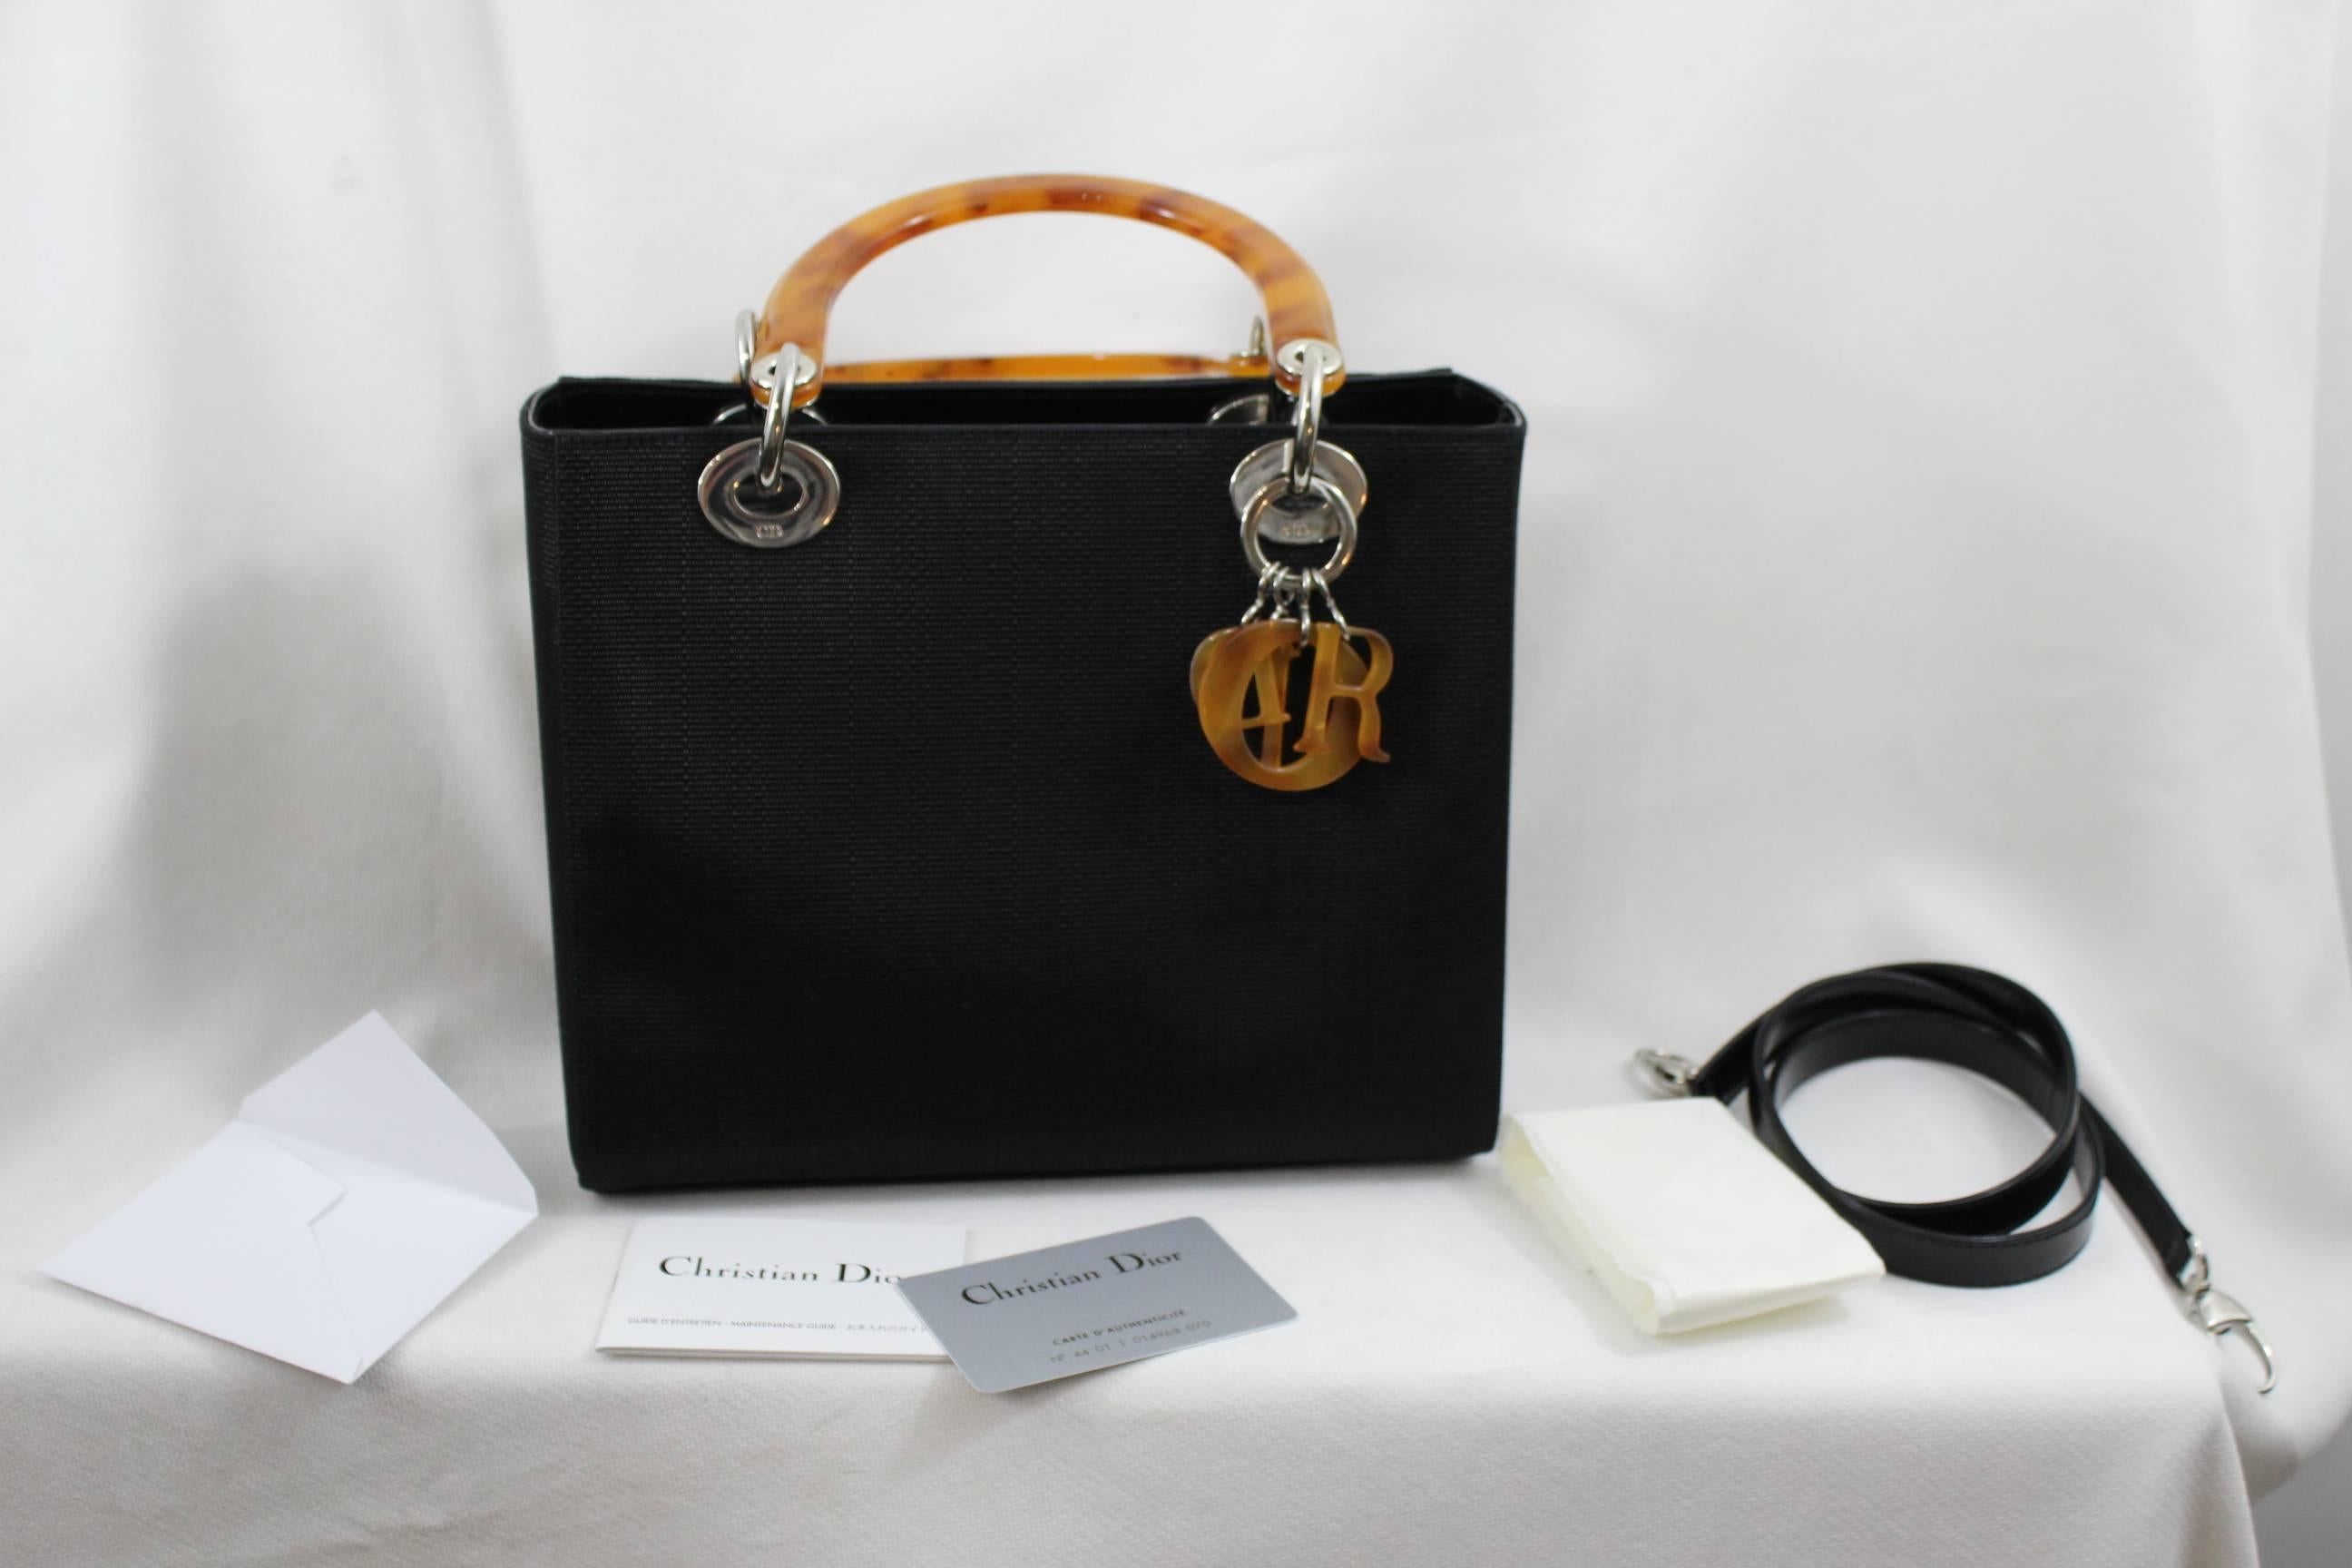 Awesome Ladu Dior Black small bag (24 cm) with shoulder strap.

bag new never used.

Dust bag and card.